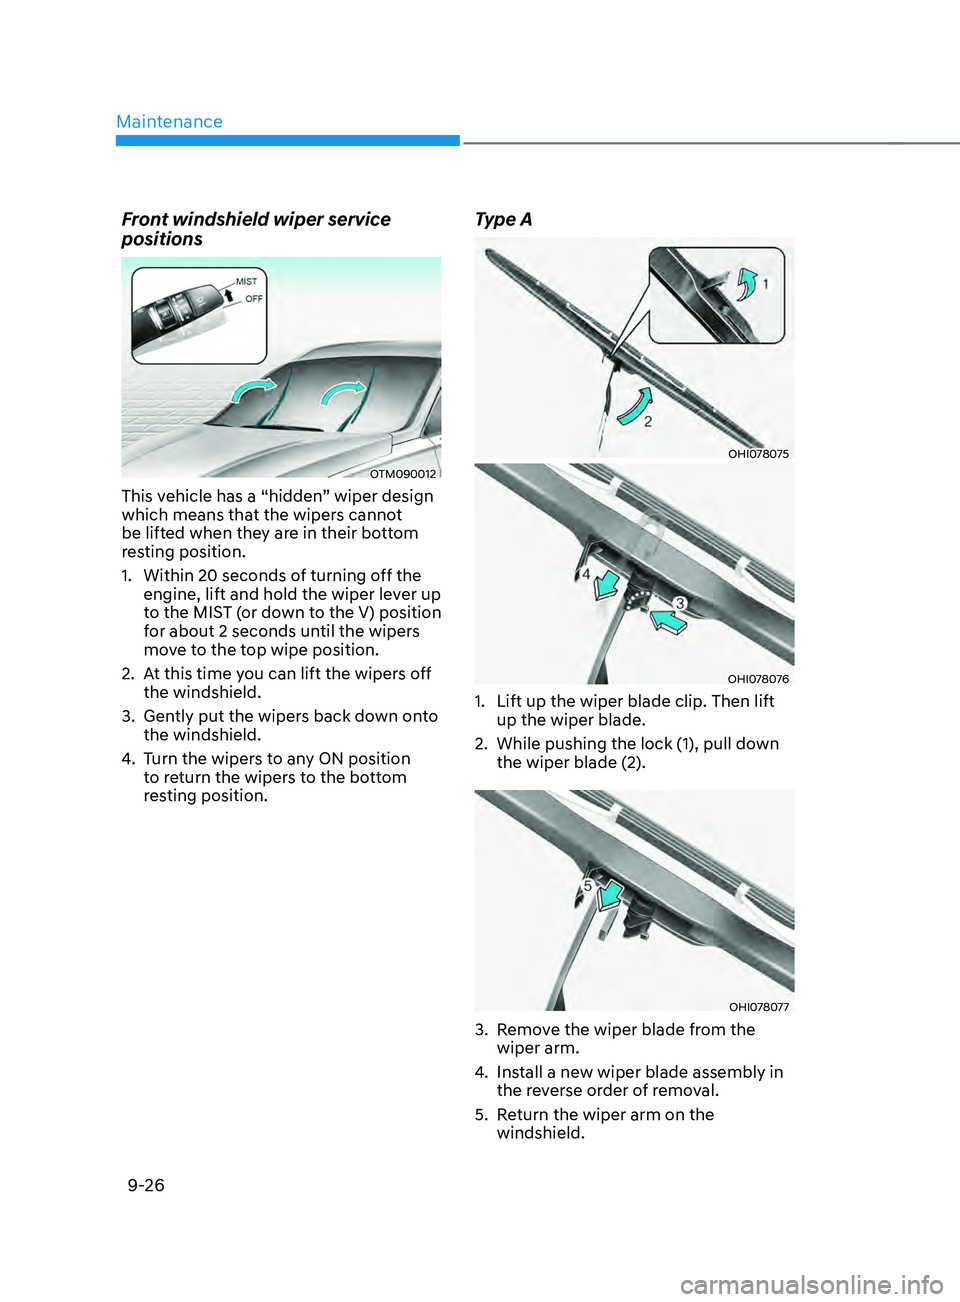 HYUNDAI SANTA FE LIMITED 2021  Owners Manual Maintenance
9-26
Front windshield wiper service 
positions
OTM090012
This vehicle has a “hidden” wiper design 
which means that the wipers cannot 
be lifted when they are in their bottom 
resting 